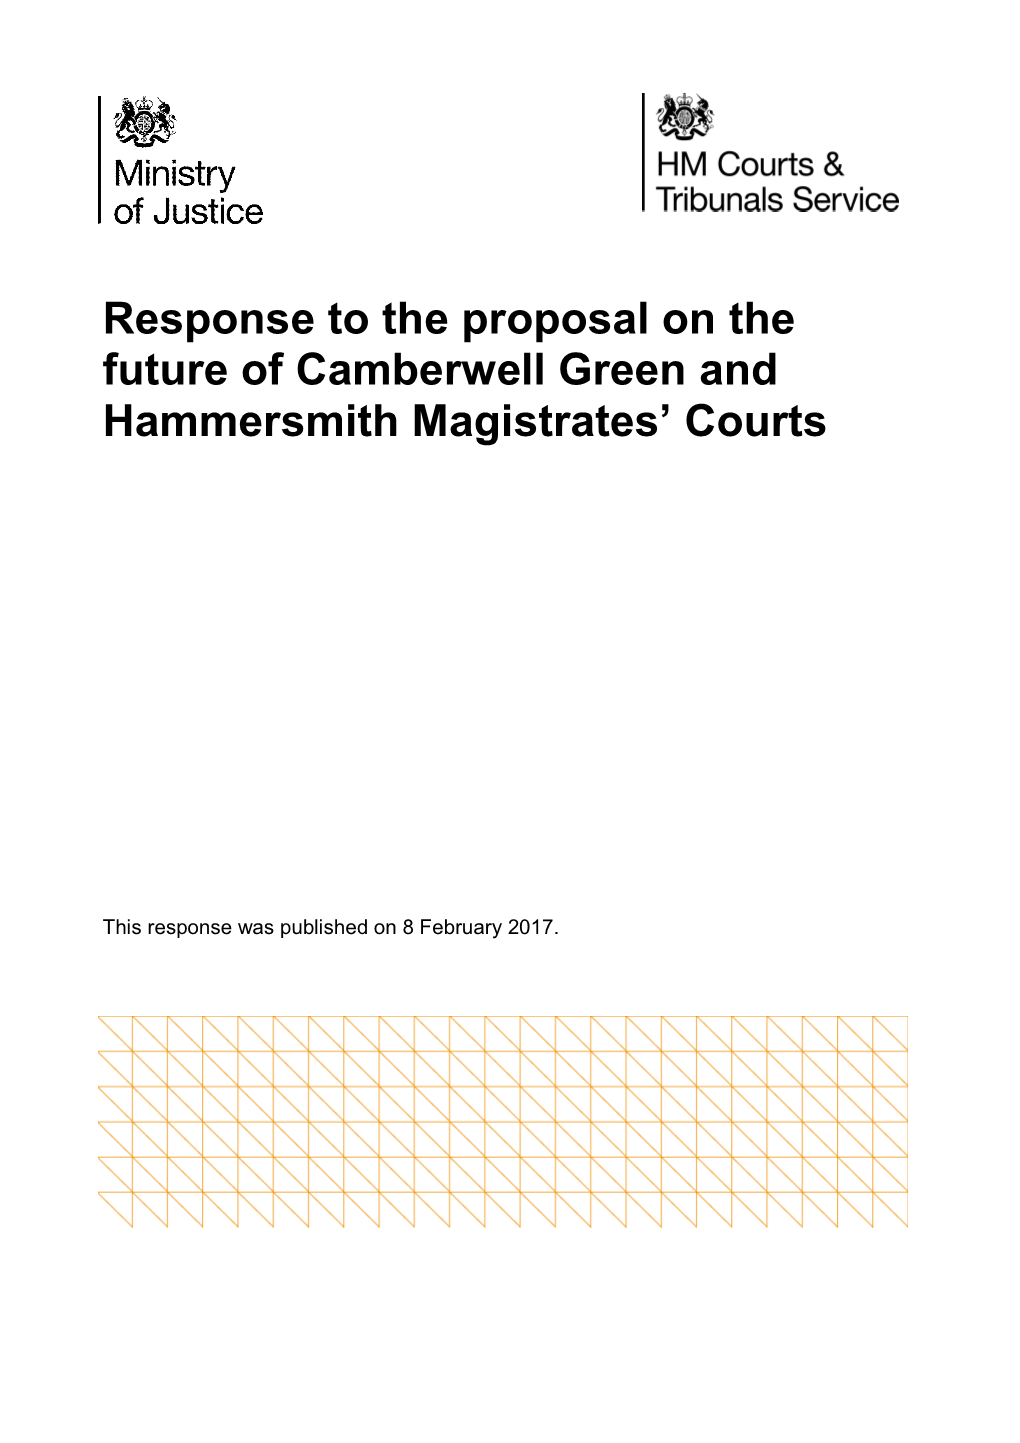 Response to the Proposal on the Future of Camberwell Green and Hammersmith Magistrates’ Courts